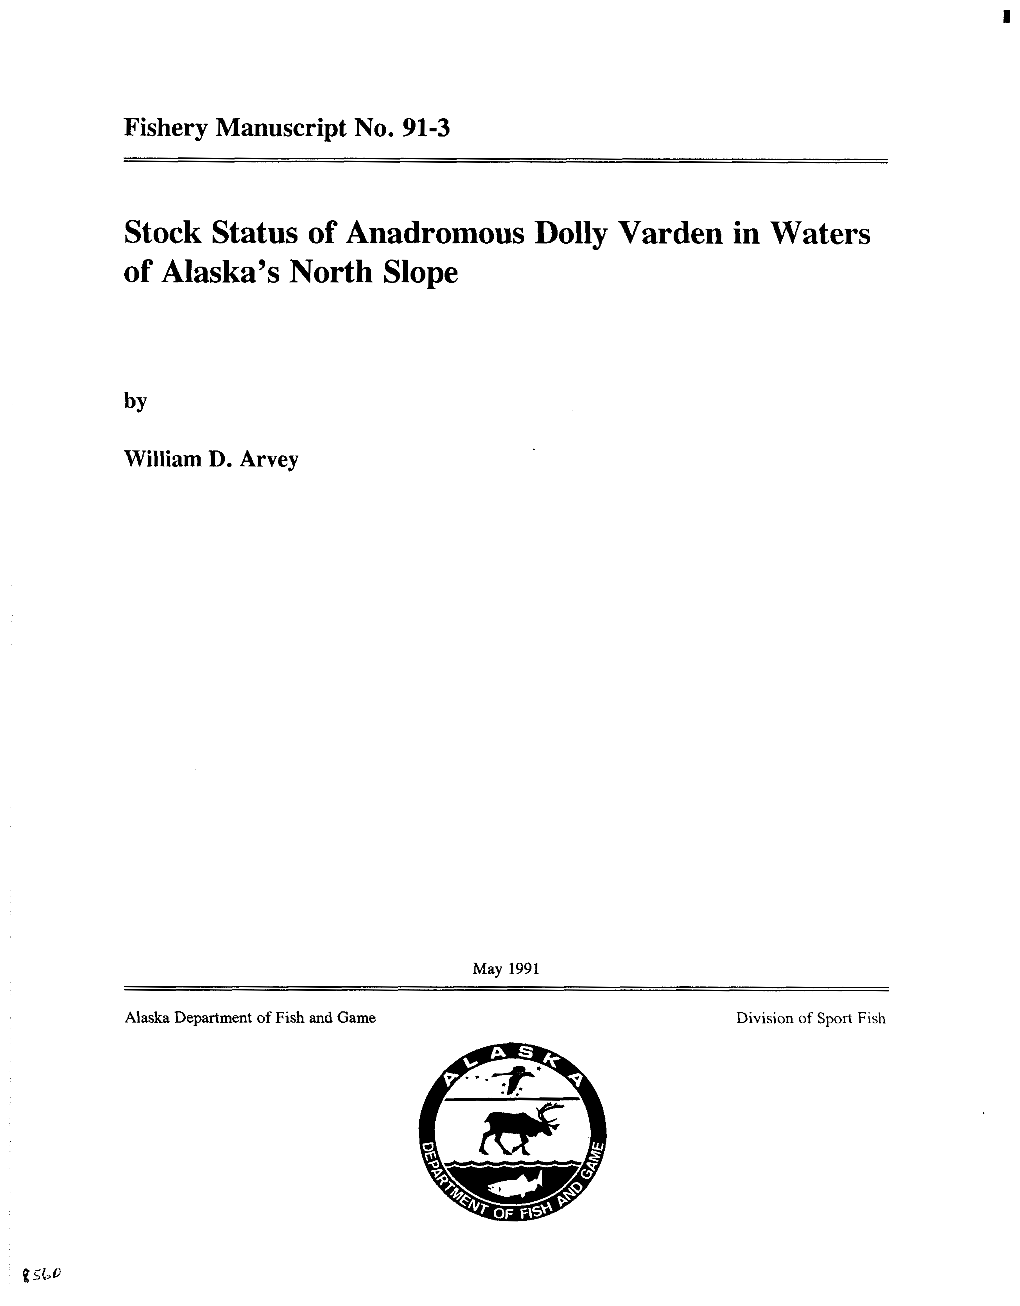 Stock Status of Anadromous Dolly Varden in Waters of Alaska’S North Slope